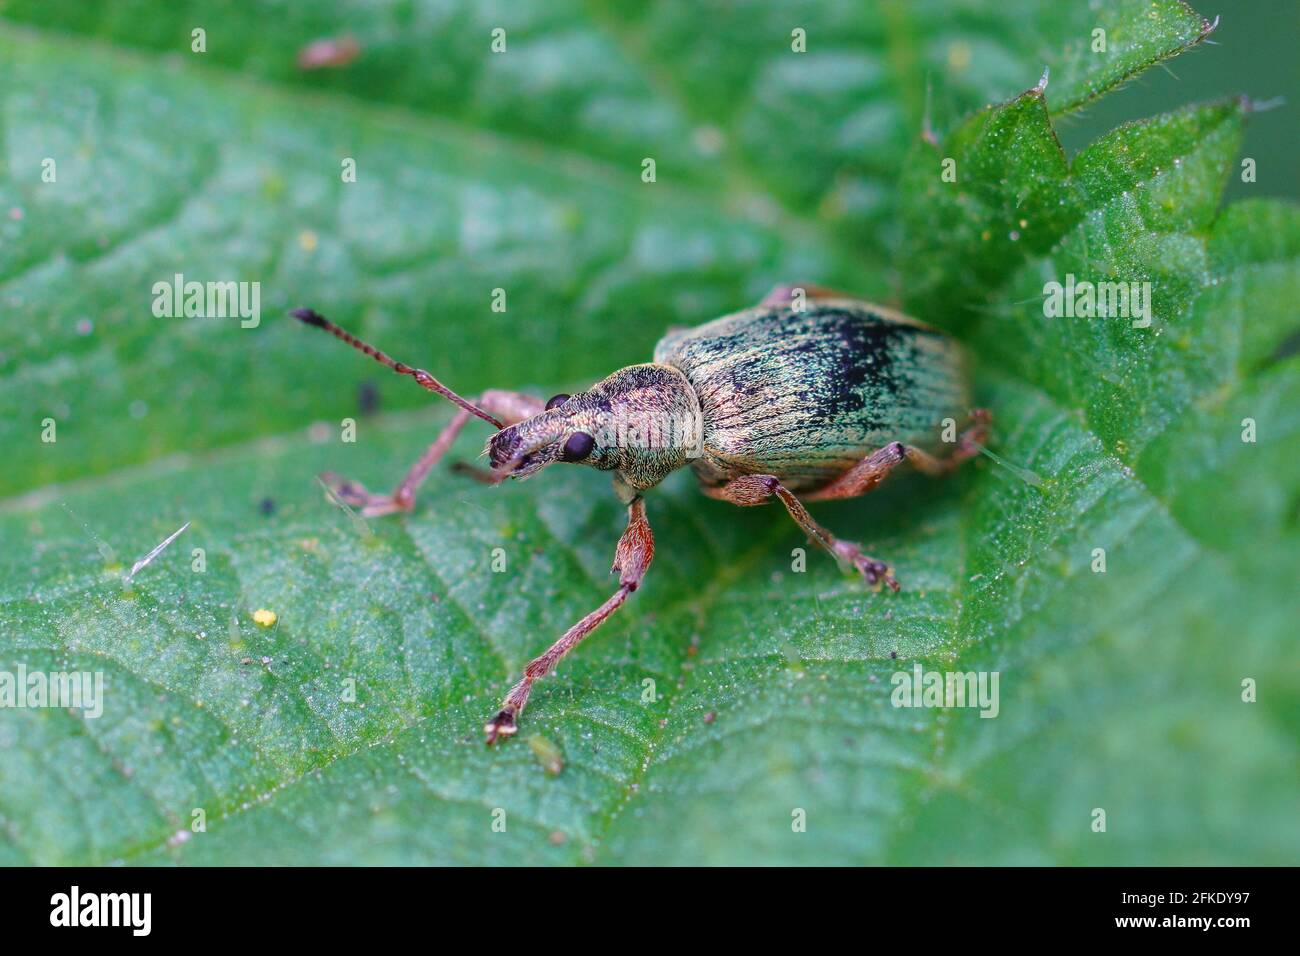 Closeup shot of a green immigrant leaf weevil on a green leaf Stock Photo